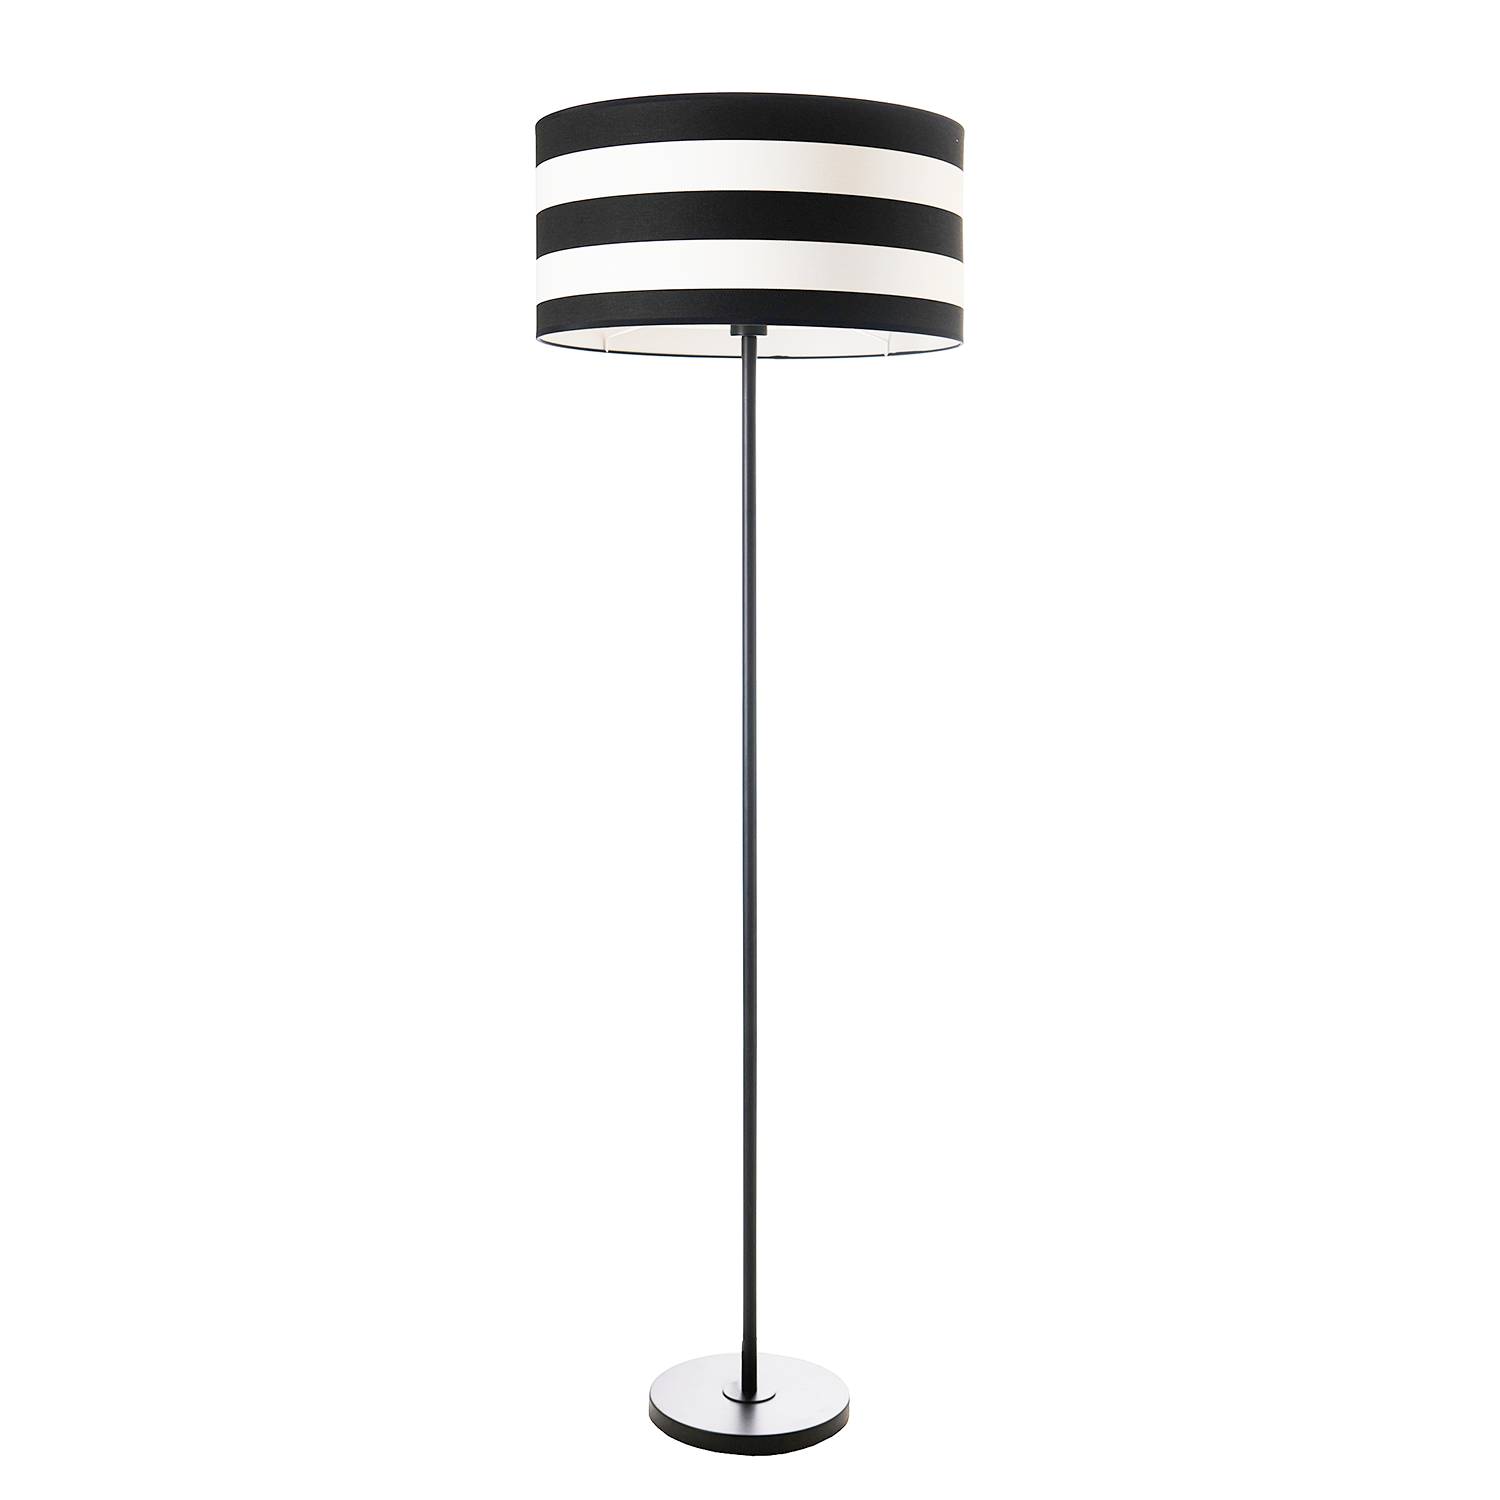 Image of Lampadaire Courville 000000001000251210